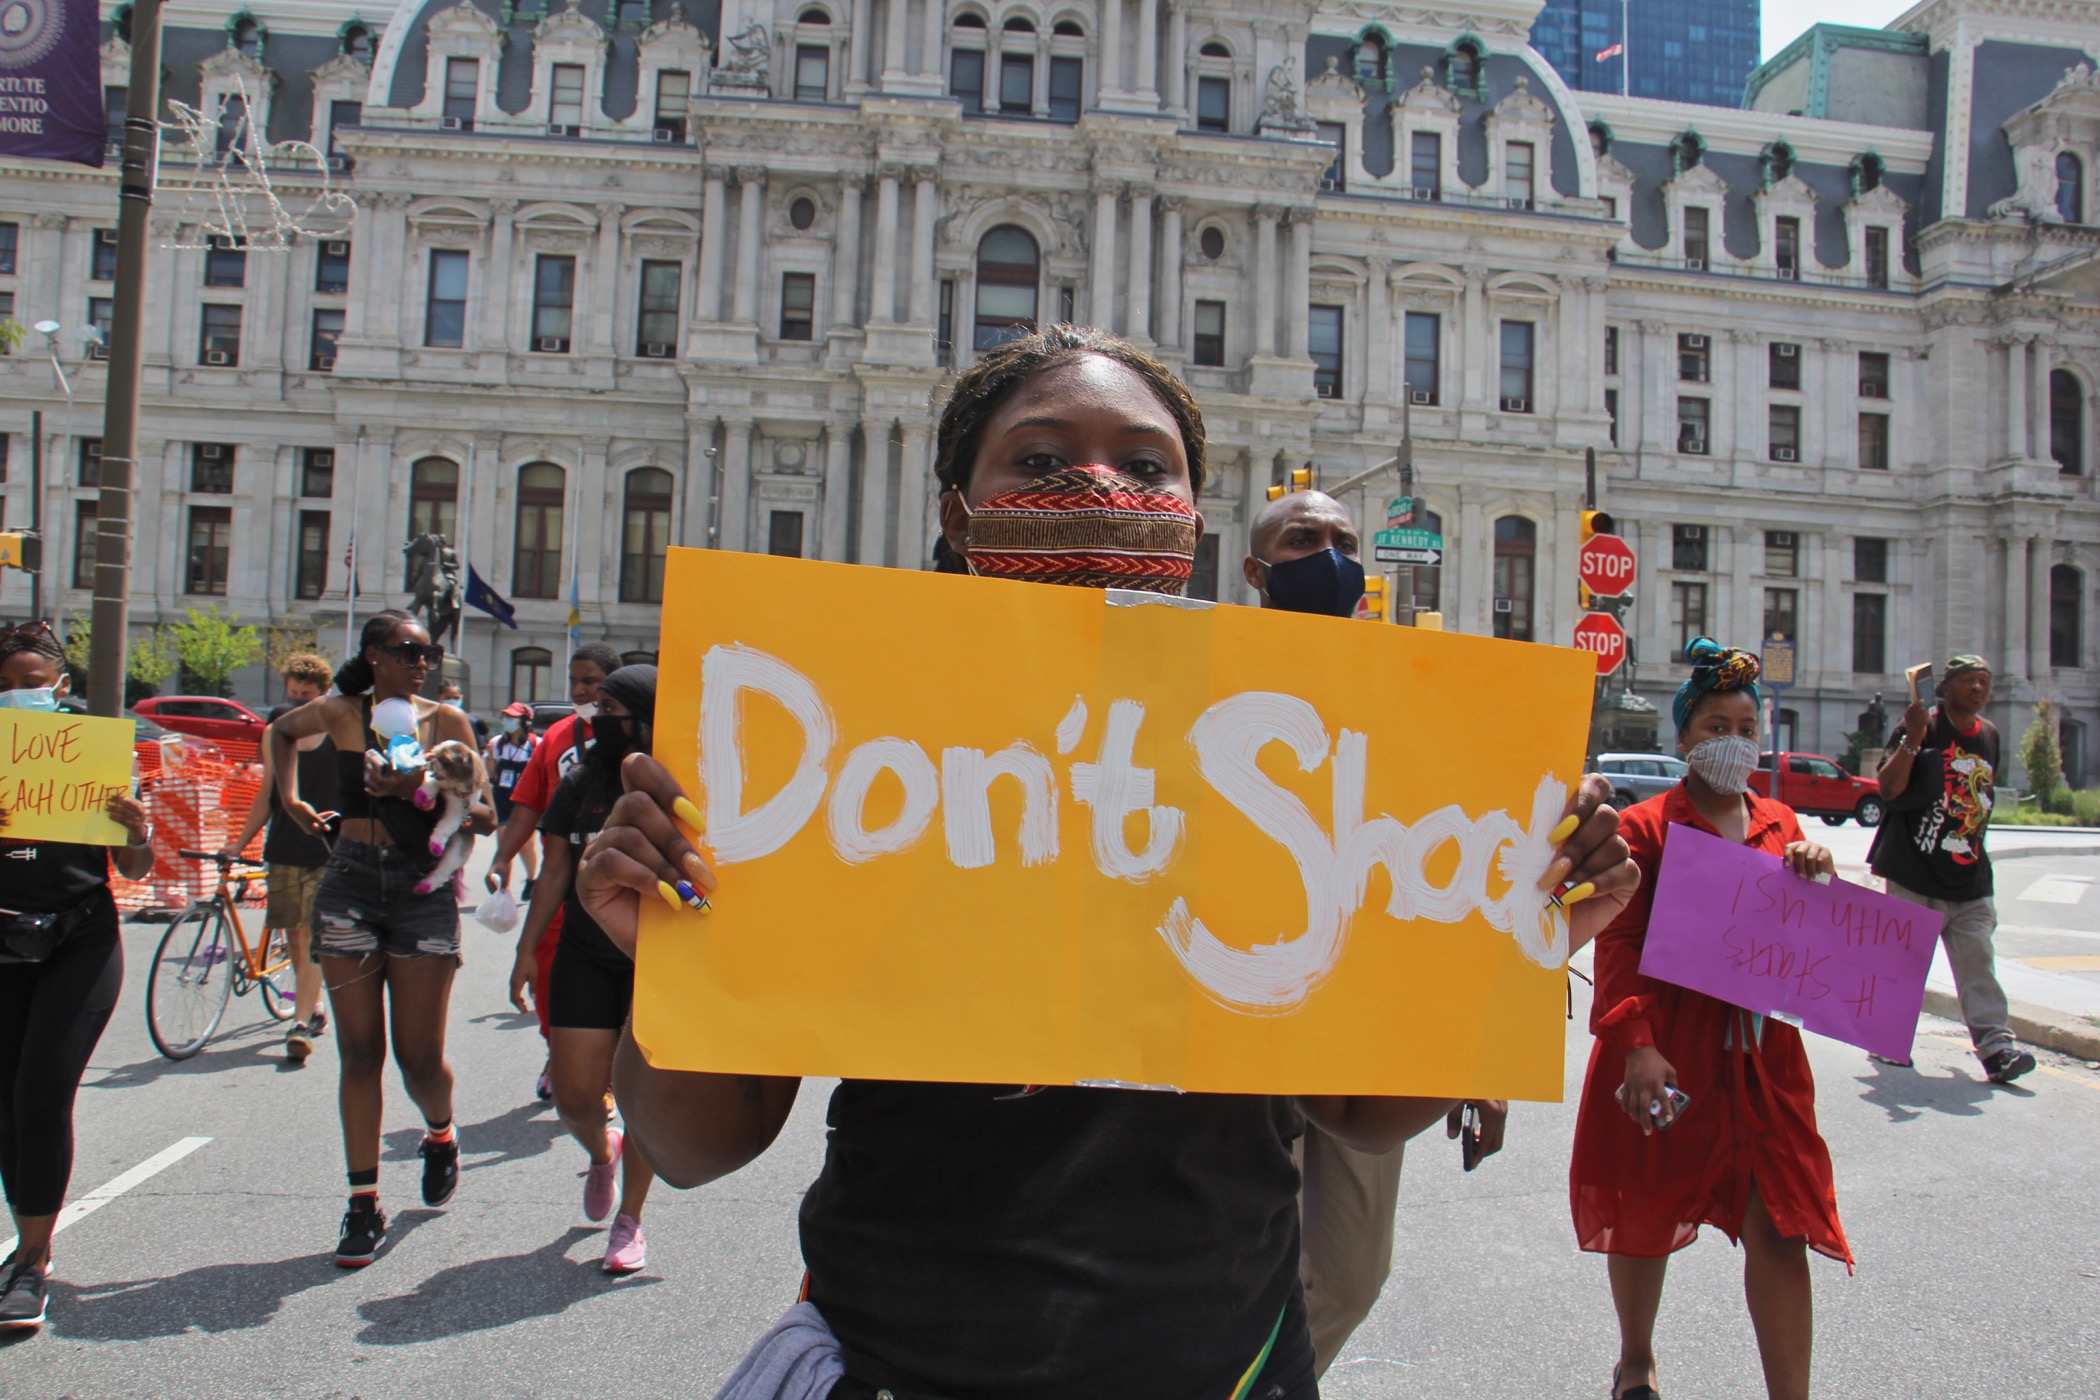 Sarai Ford marches with a group of young people calling for an end to gun violence on July 20, 2020.